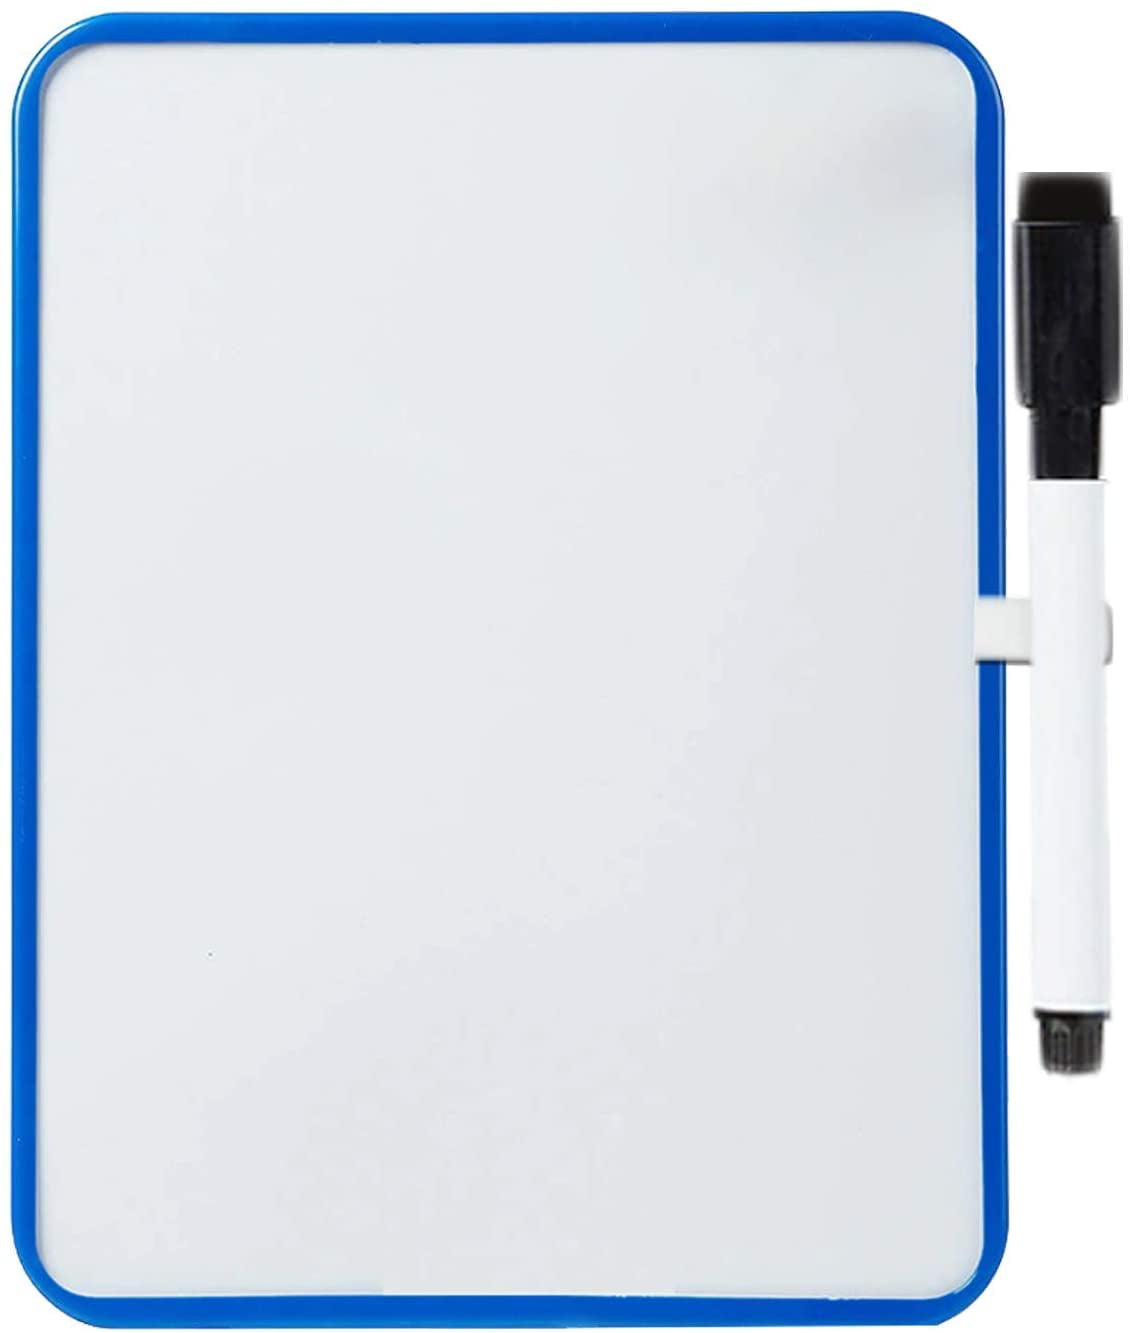 17"x12" Dry Erase Magnetic Refrigerator Flexible Blank White Board Markers USA 